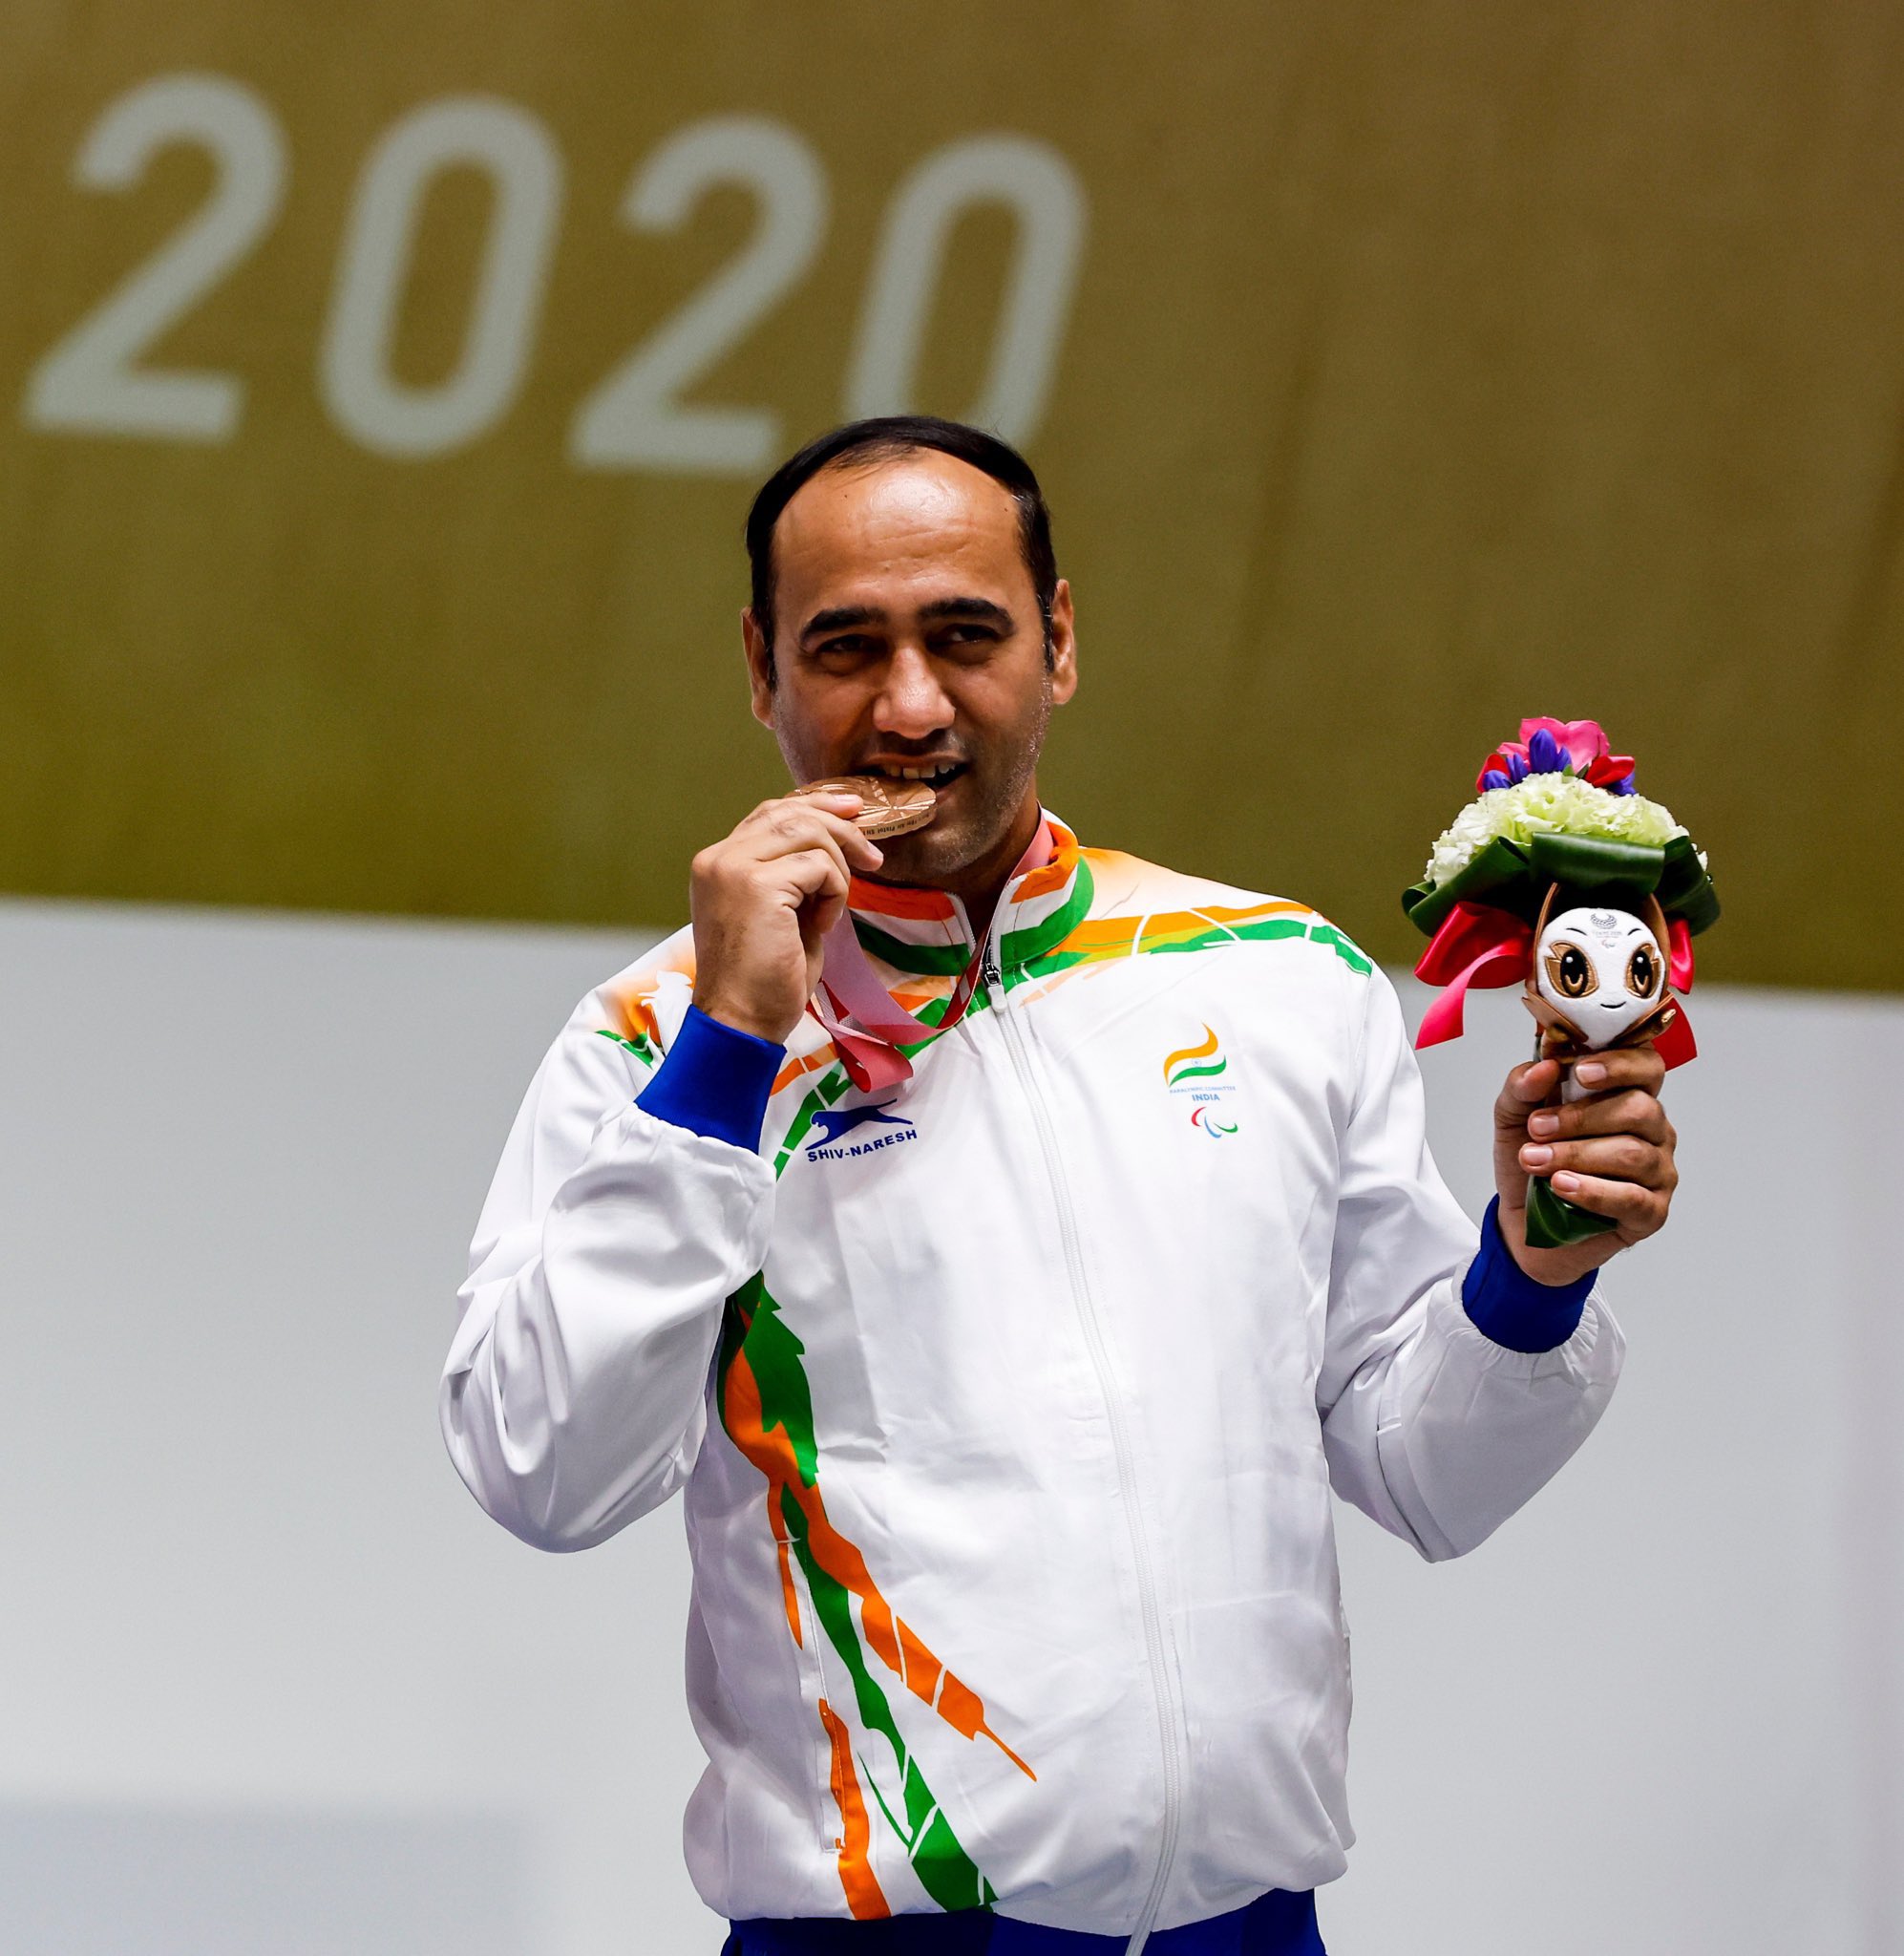 2020 Paralympics | Shooter Singhraj Adhana claims bronze medal, adds India's eighth overall